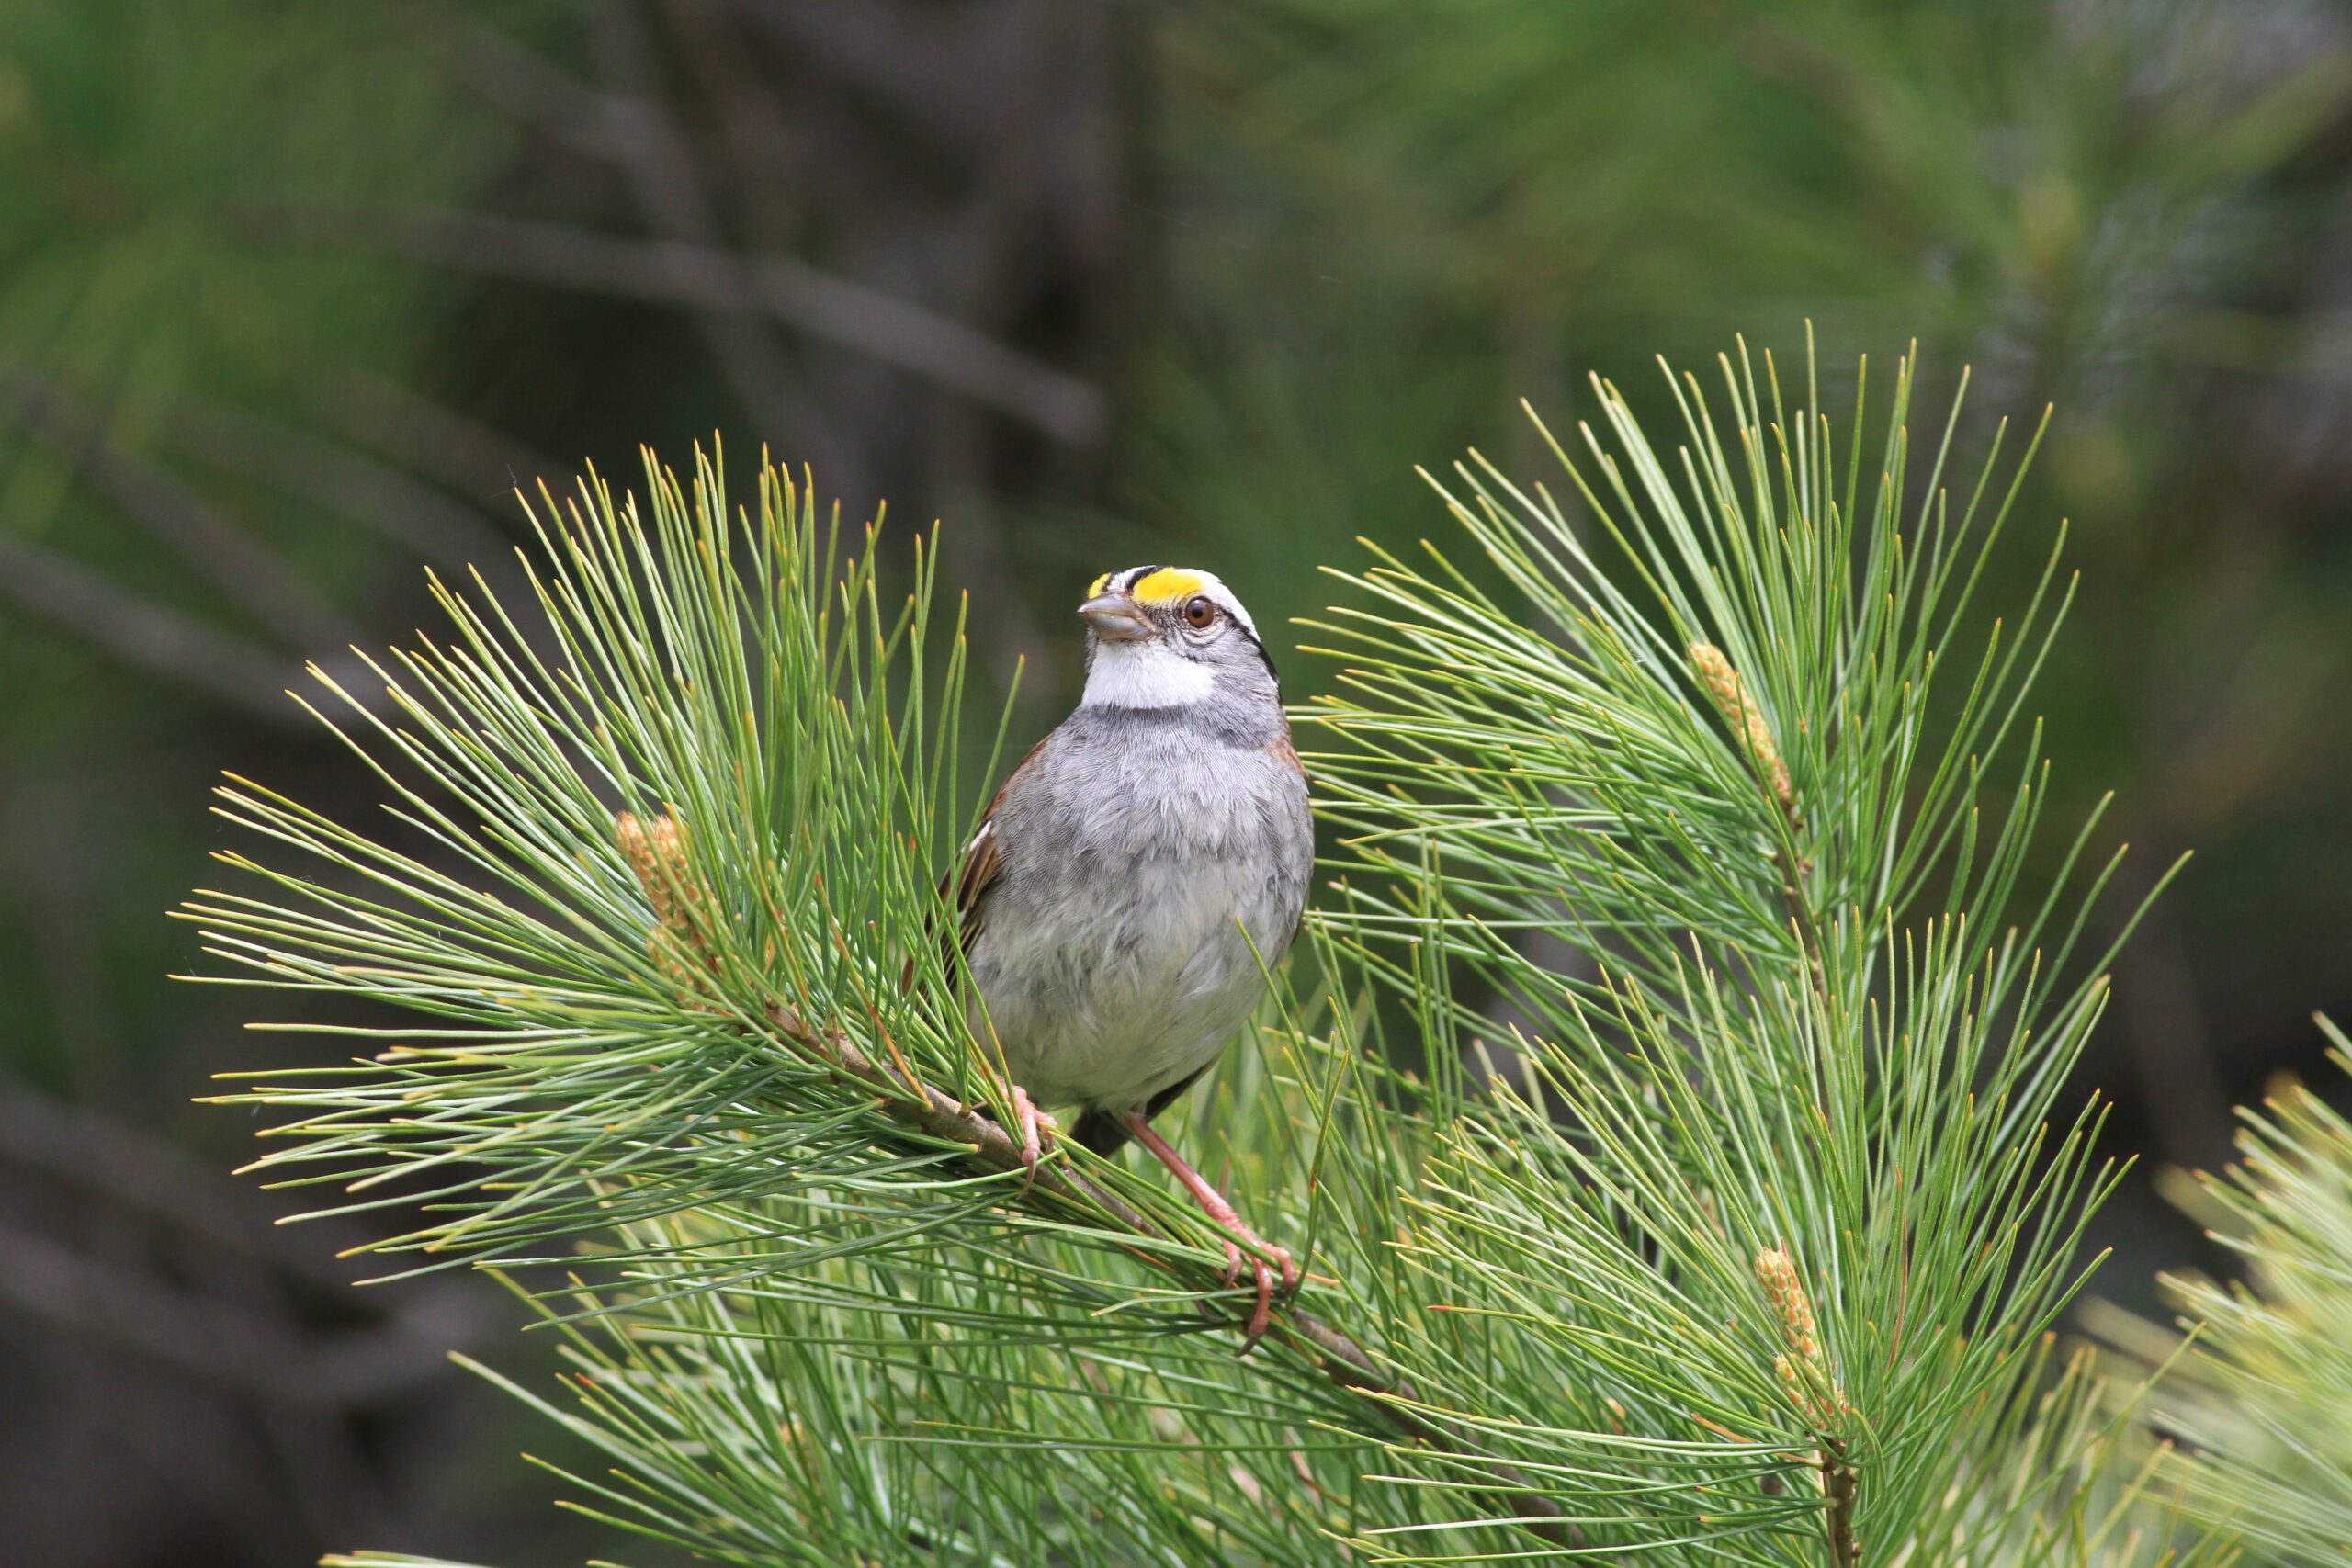 White-throated sparrows are ditching their classic song for a new tune